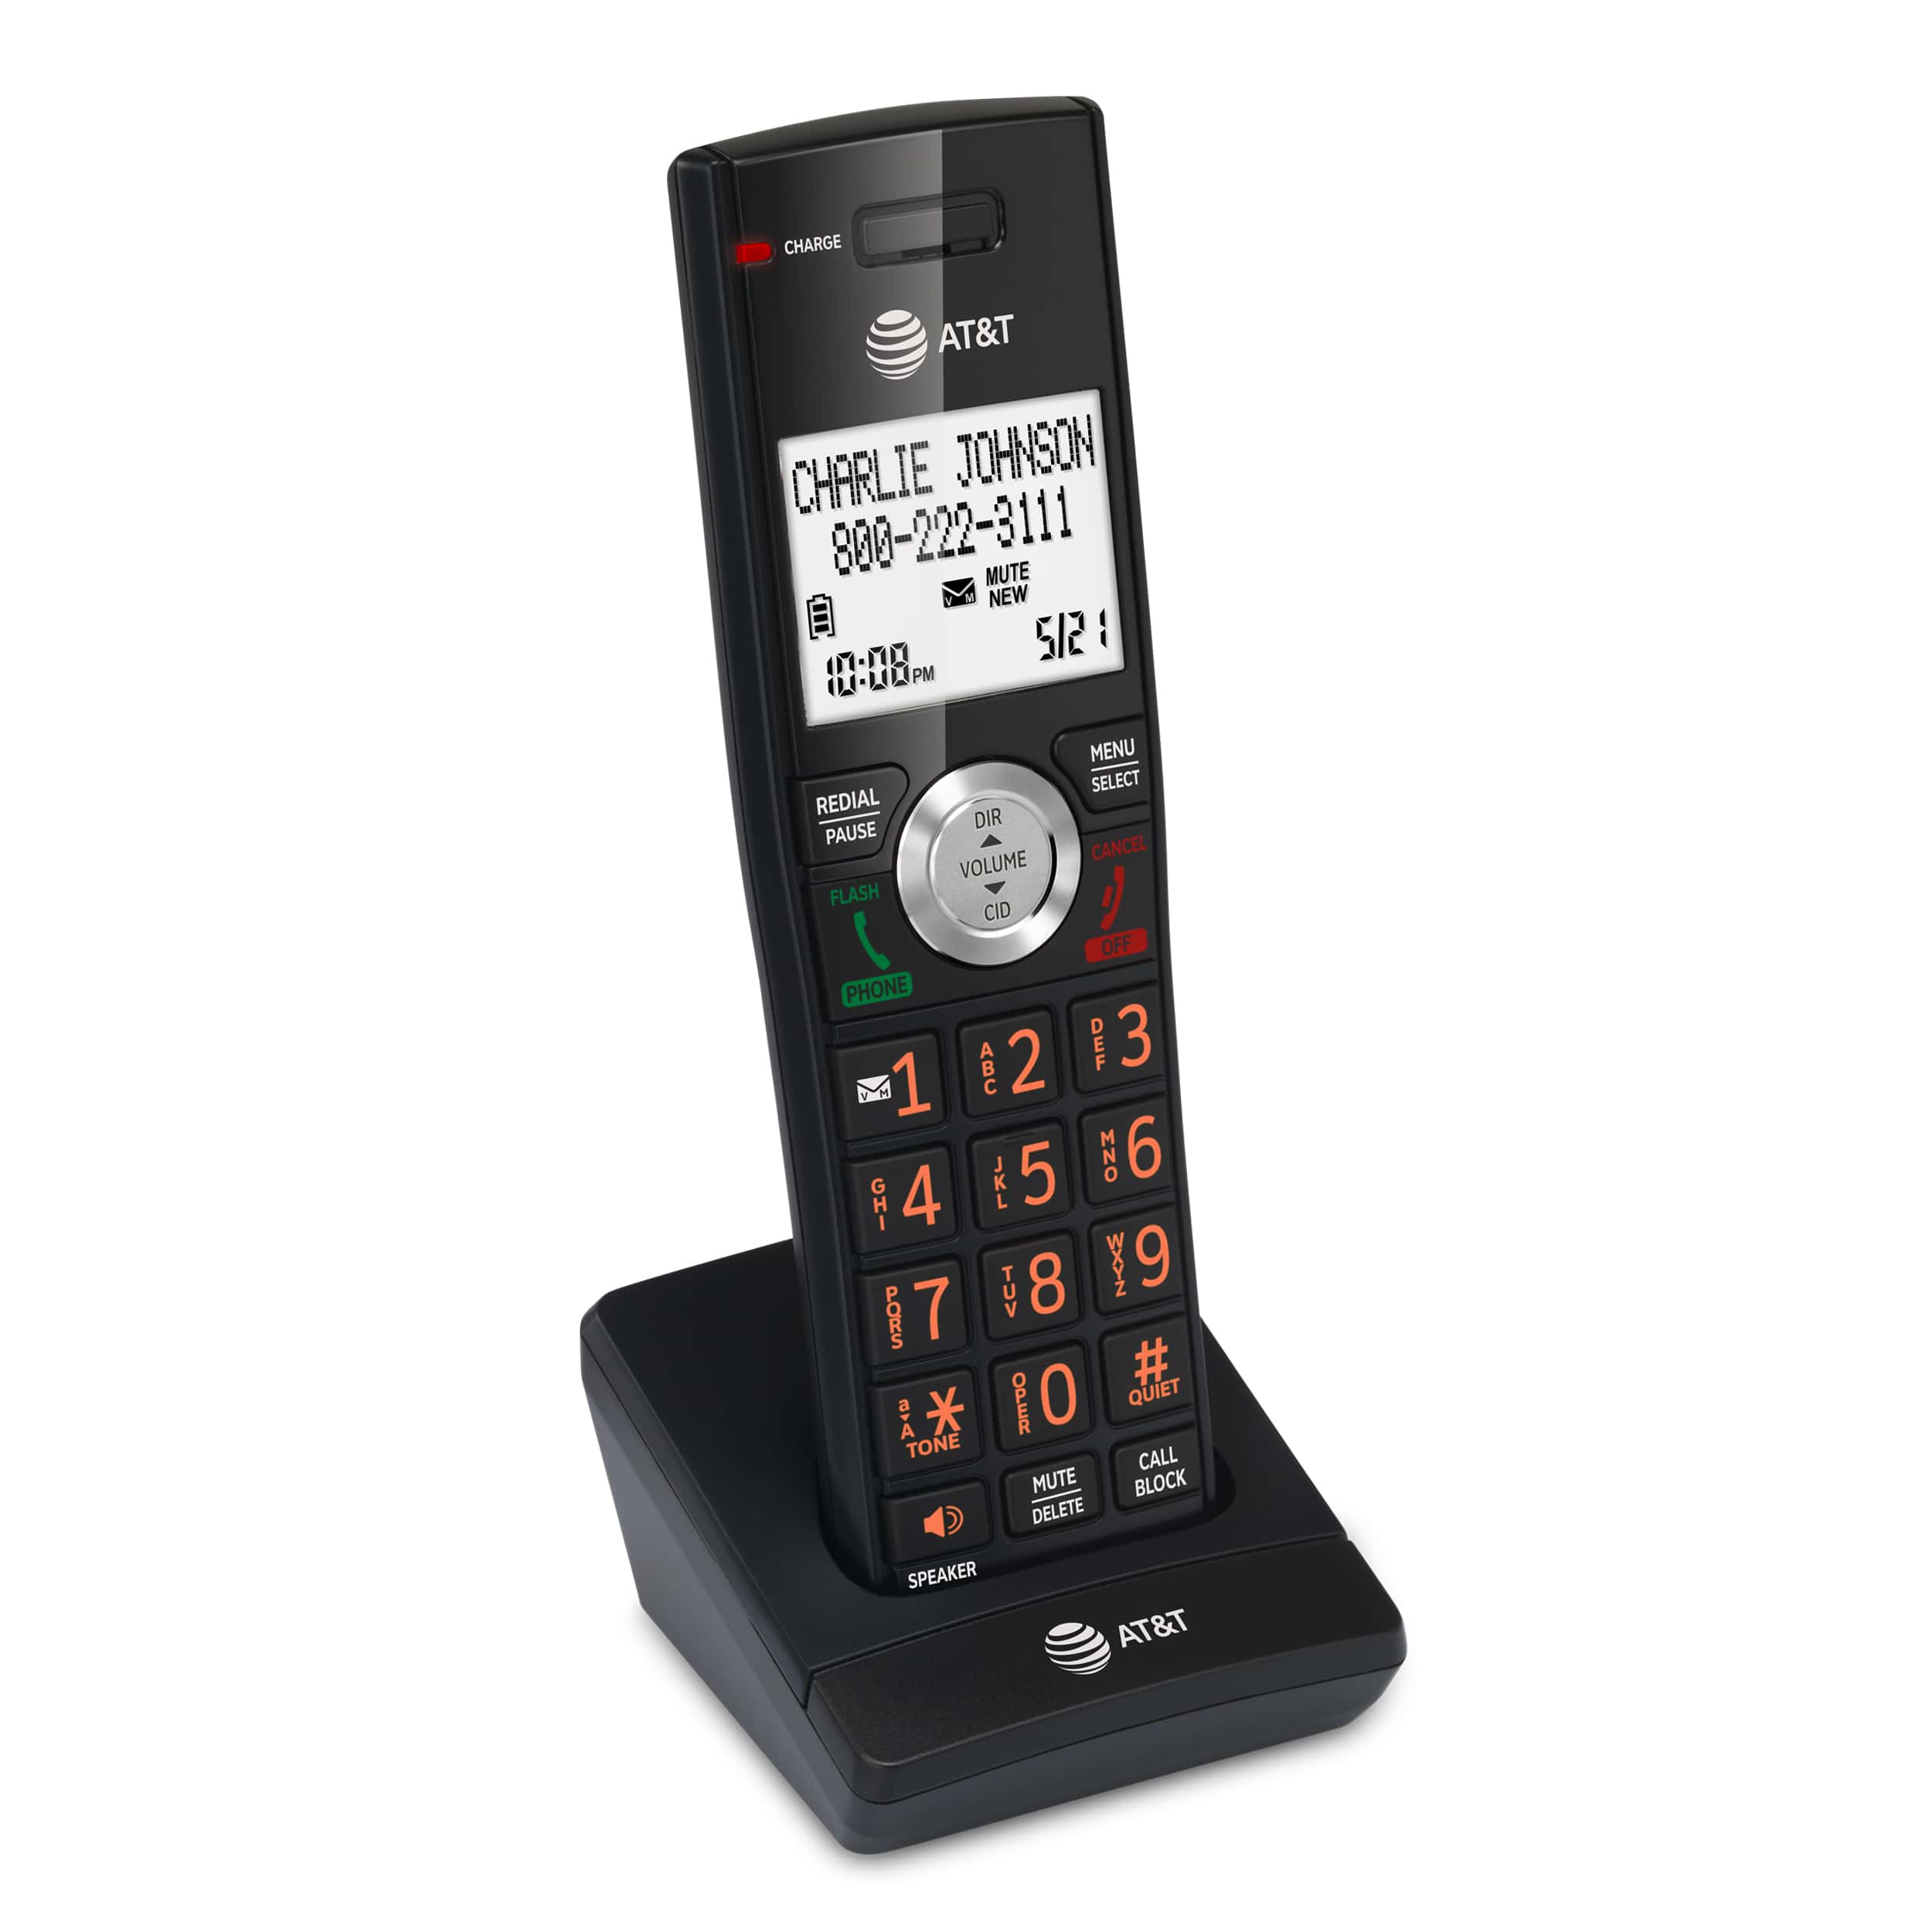 6 handset phone system with smart call blocker - view 9